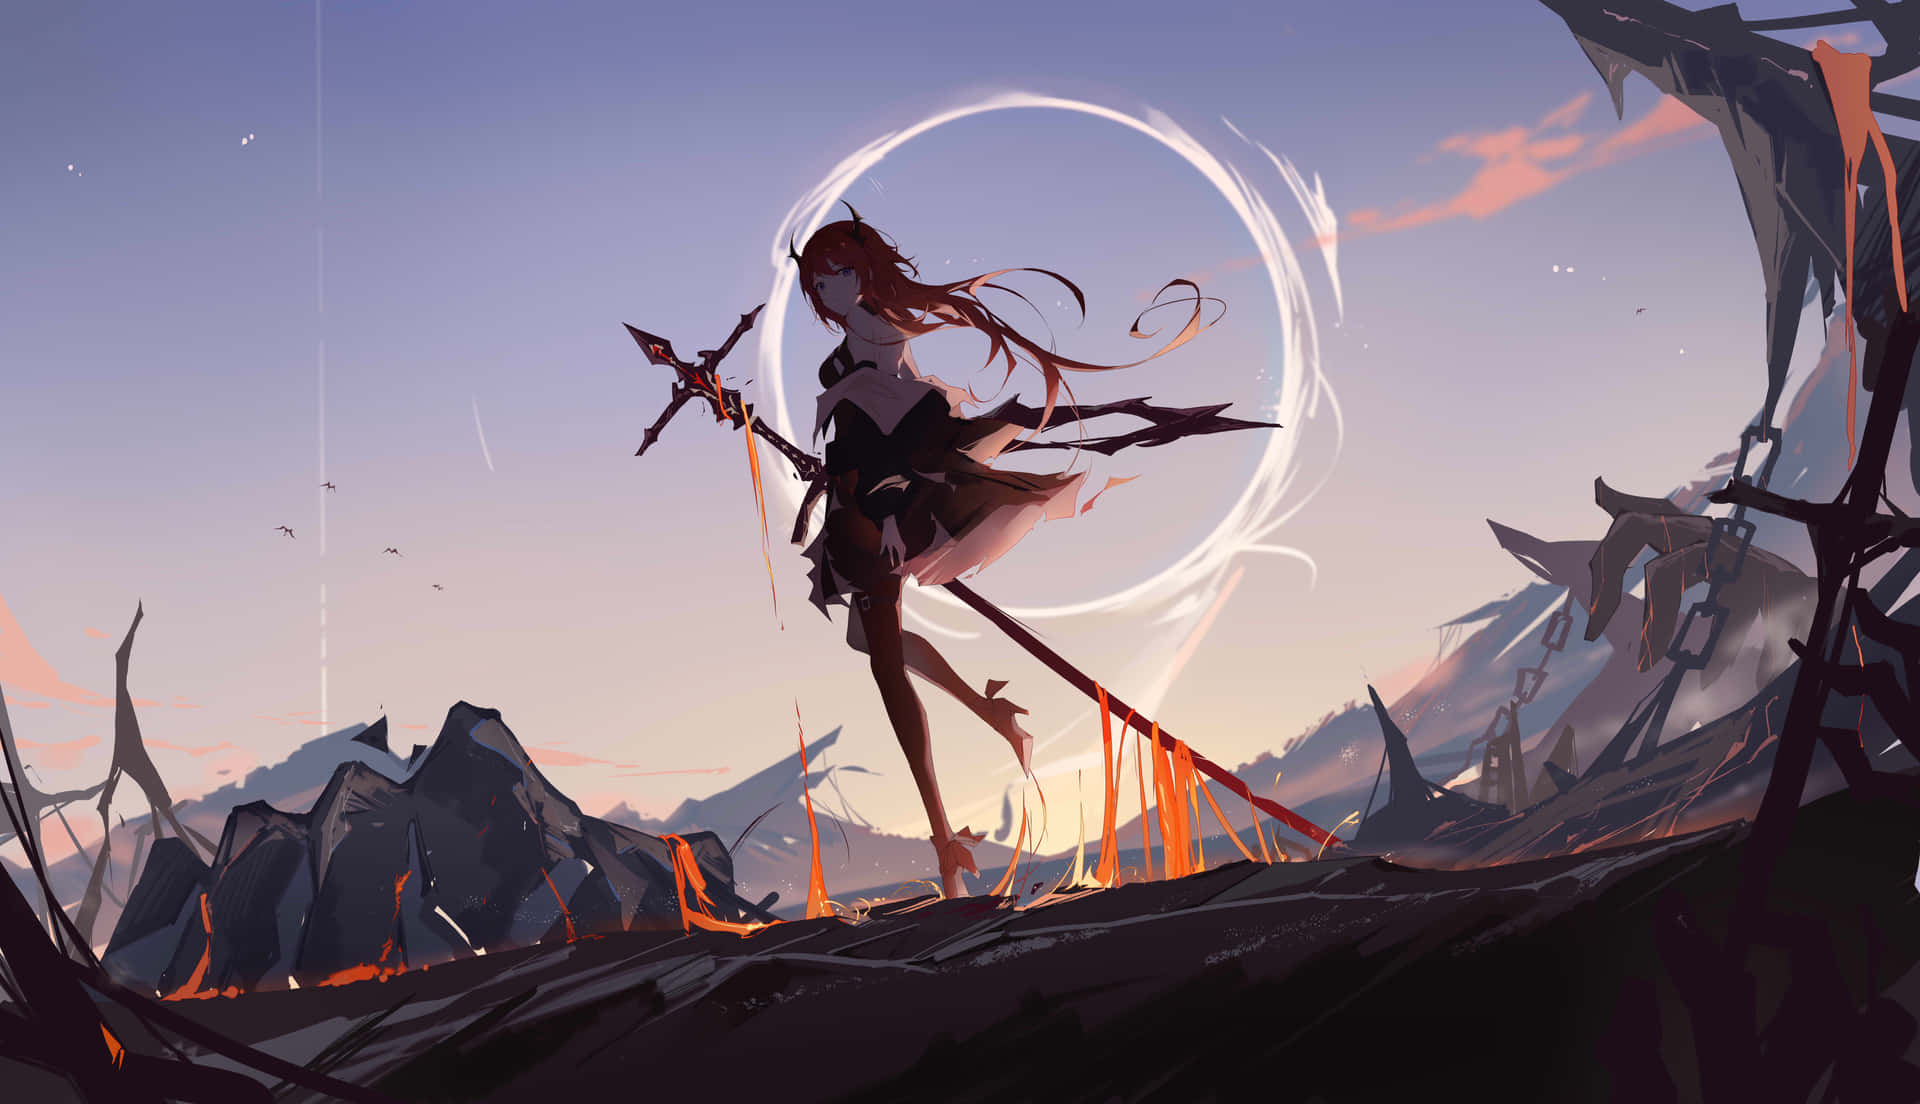 A Girl With A Sword Standing On A Hill Wallpaper